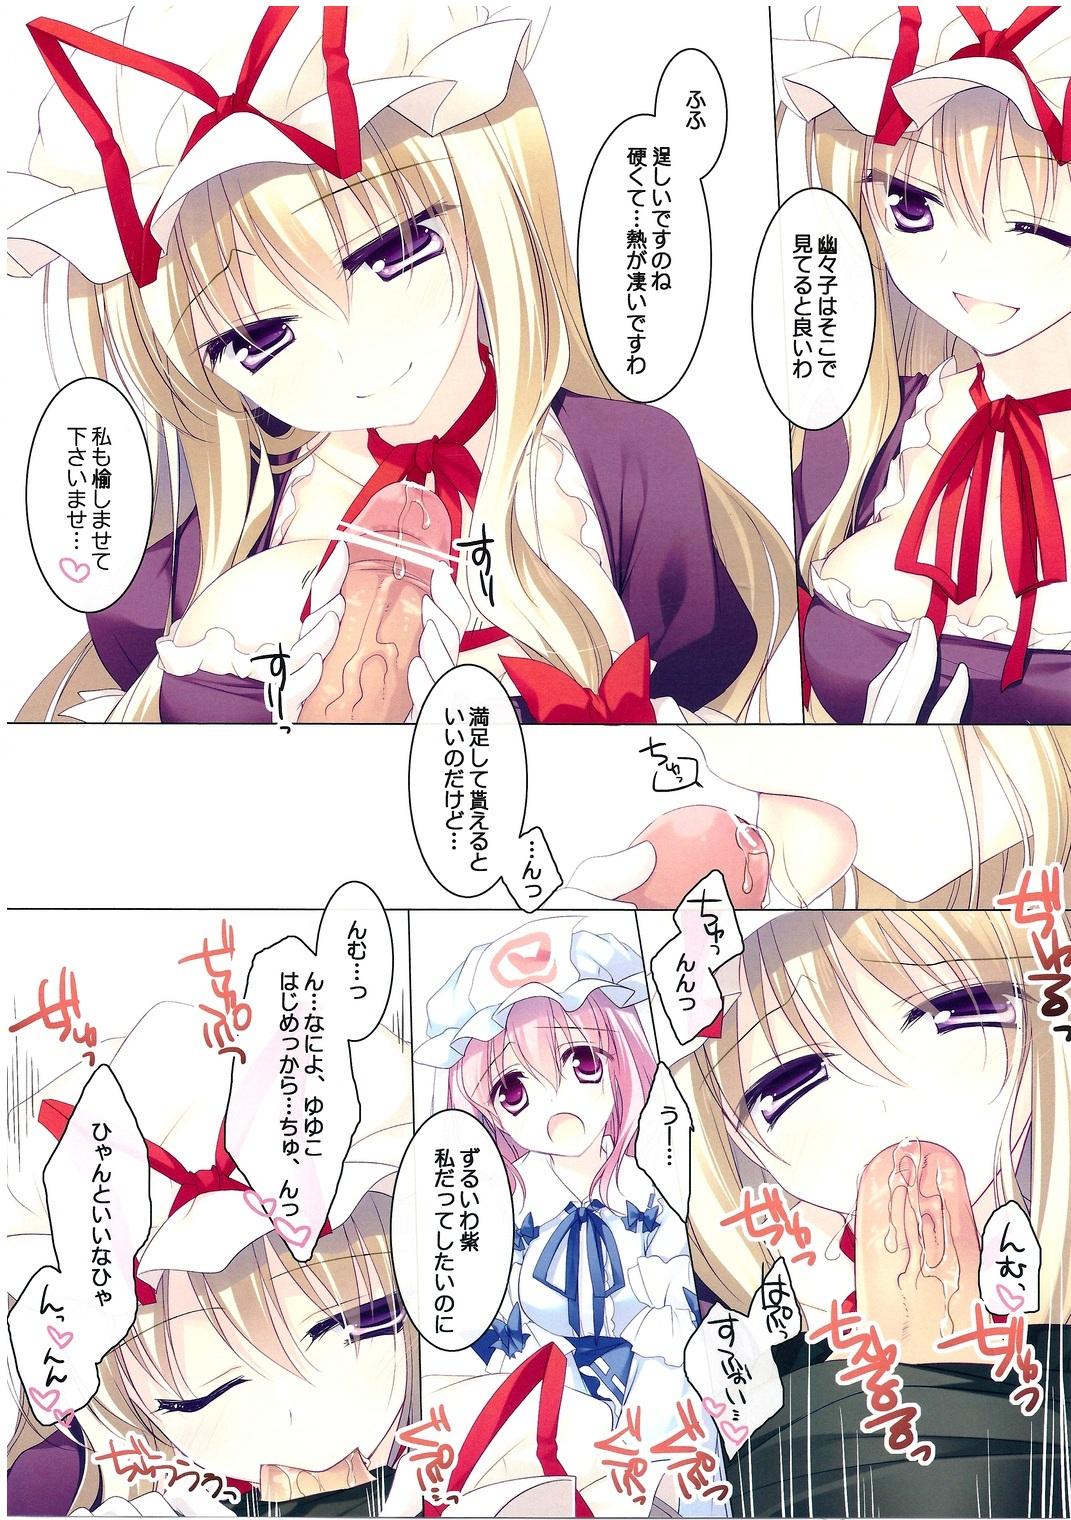 Culote MERRY MERRY PH - Touhou project Adorable - Page 5